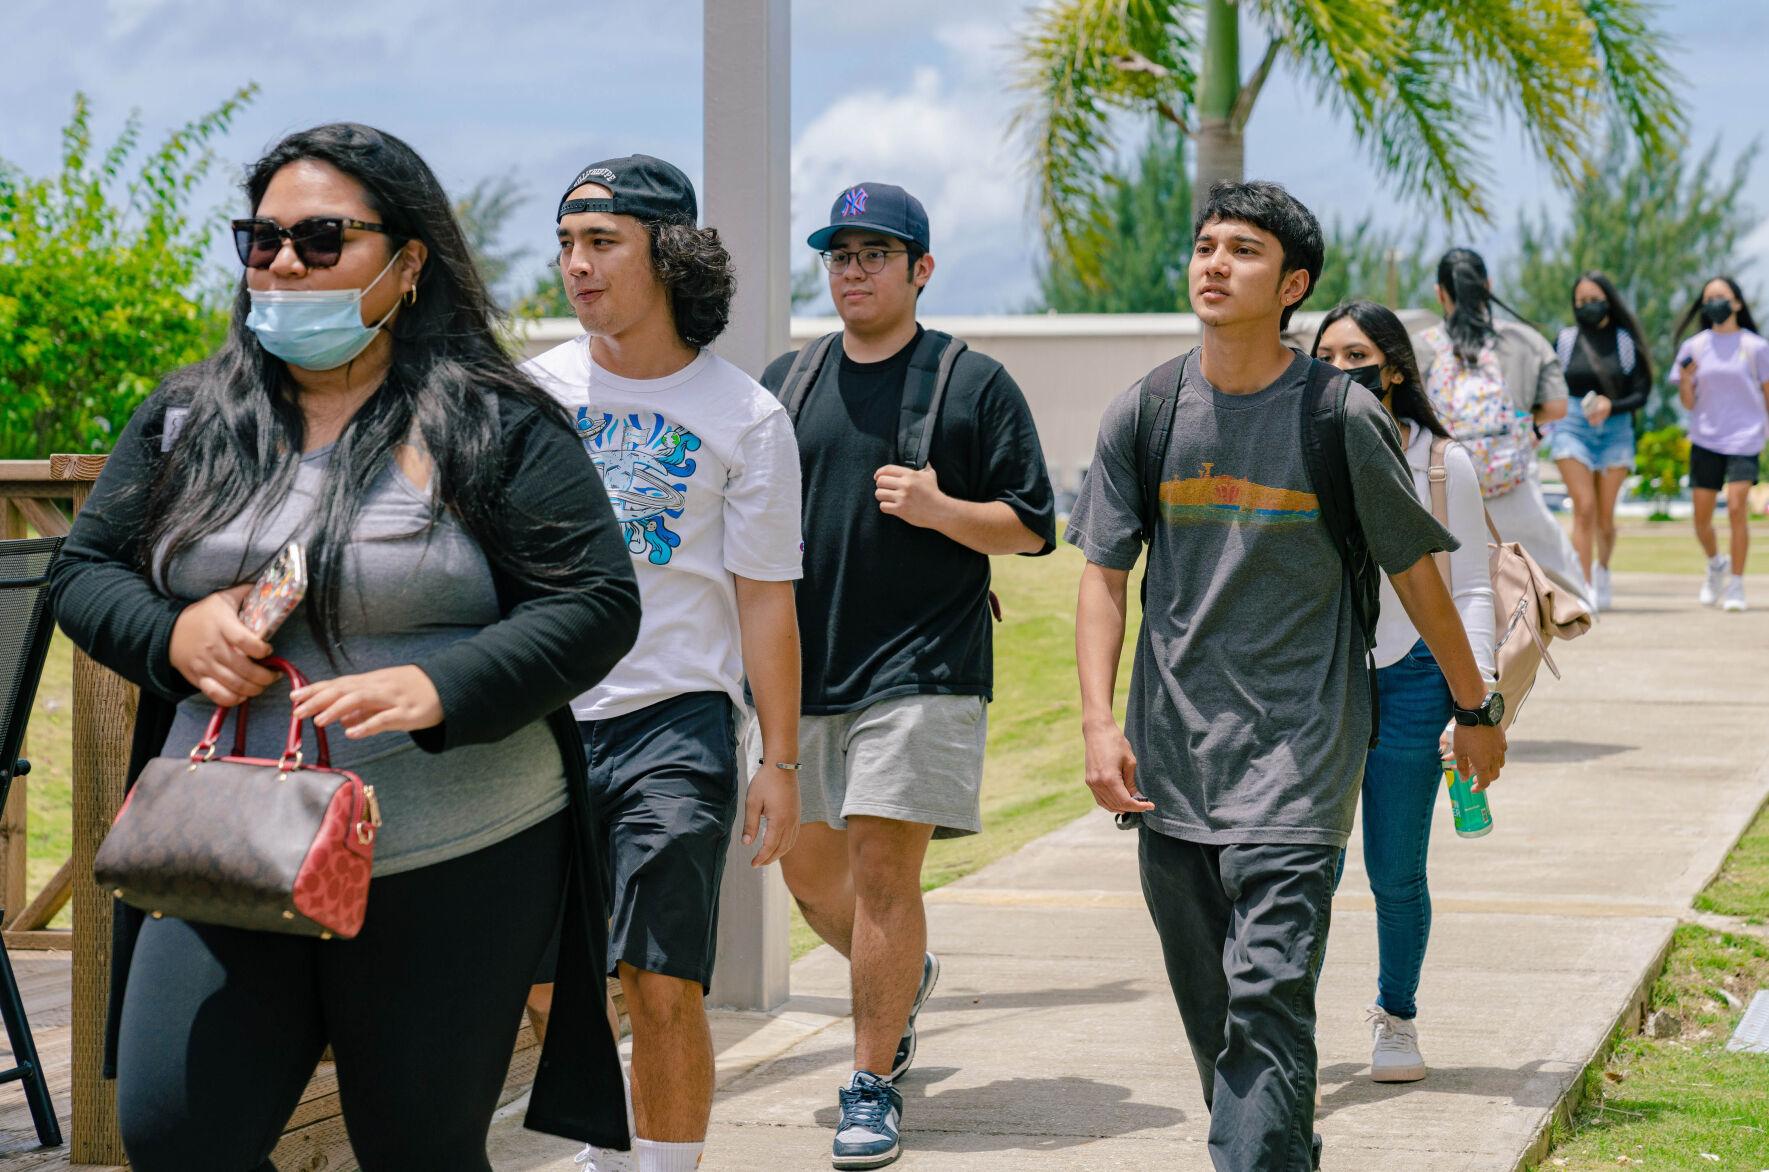 Northern Marianas College welcomed close to 1,300 students to its Fall 2022 semester on Monday, Aug. 15, 2022.